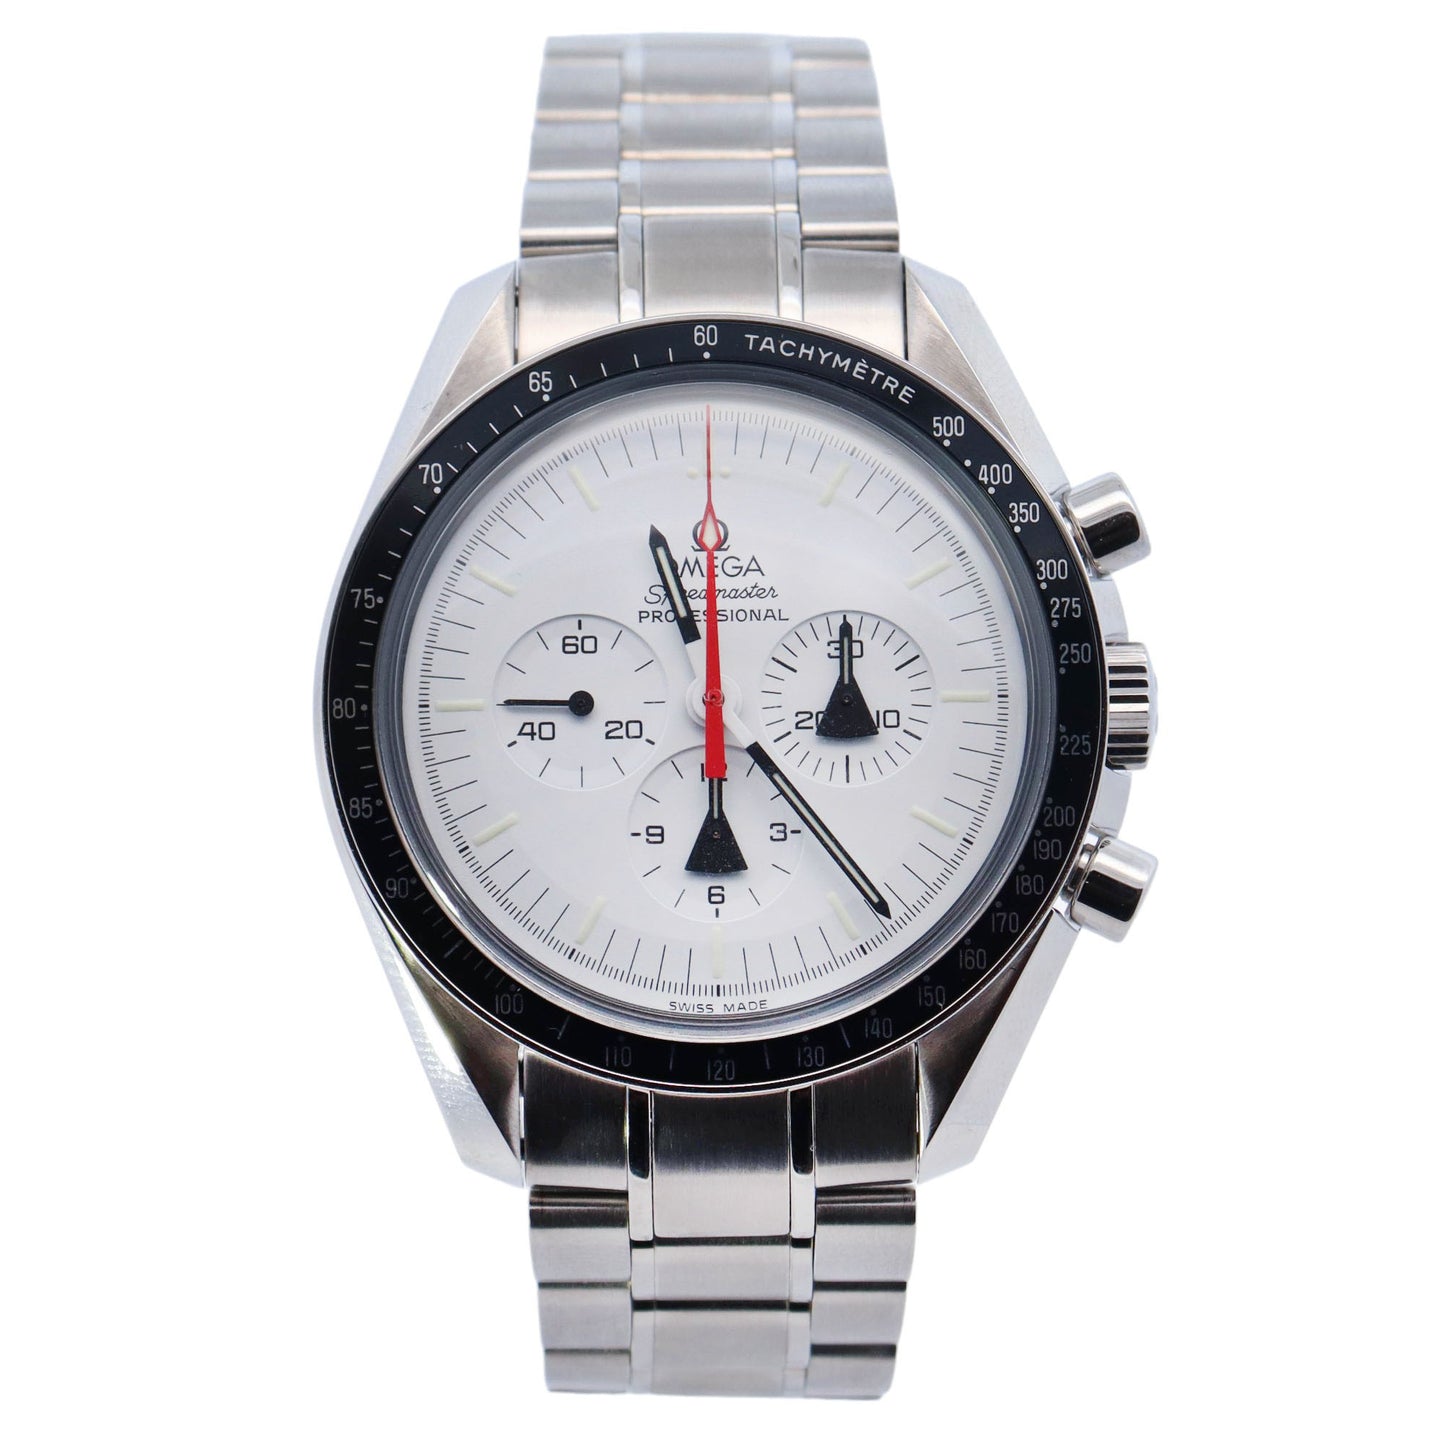 Omega Speedmaster Professional Moonswatch "Alaska Project" Stainless Steel 42mm White Chronograph Dial Watch Reference# 311.32.42.30.04.001 - Happy Jewelers Fine Jewelry Lifetime Warranty